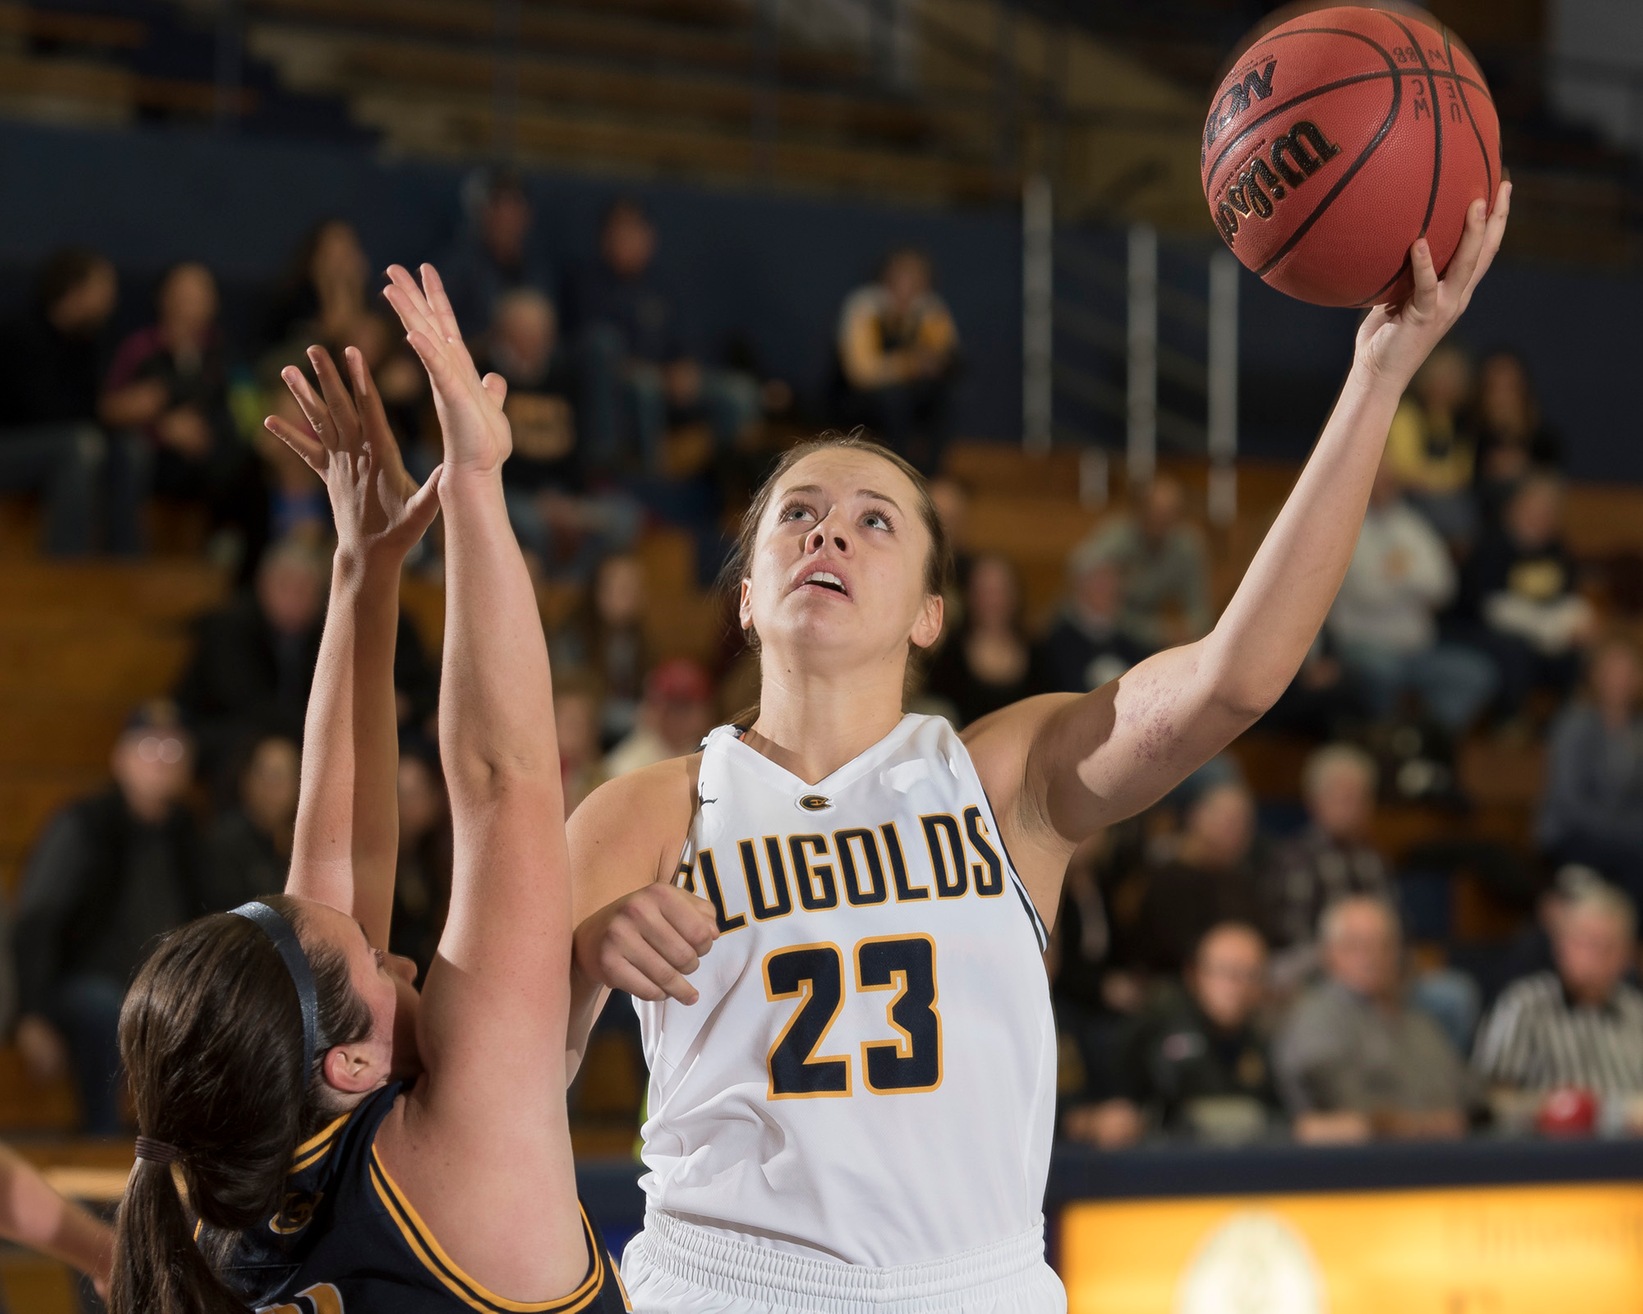 Hoeppner's career night not enough as Blugolds suffer first loss of the season